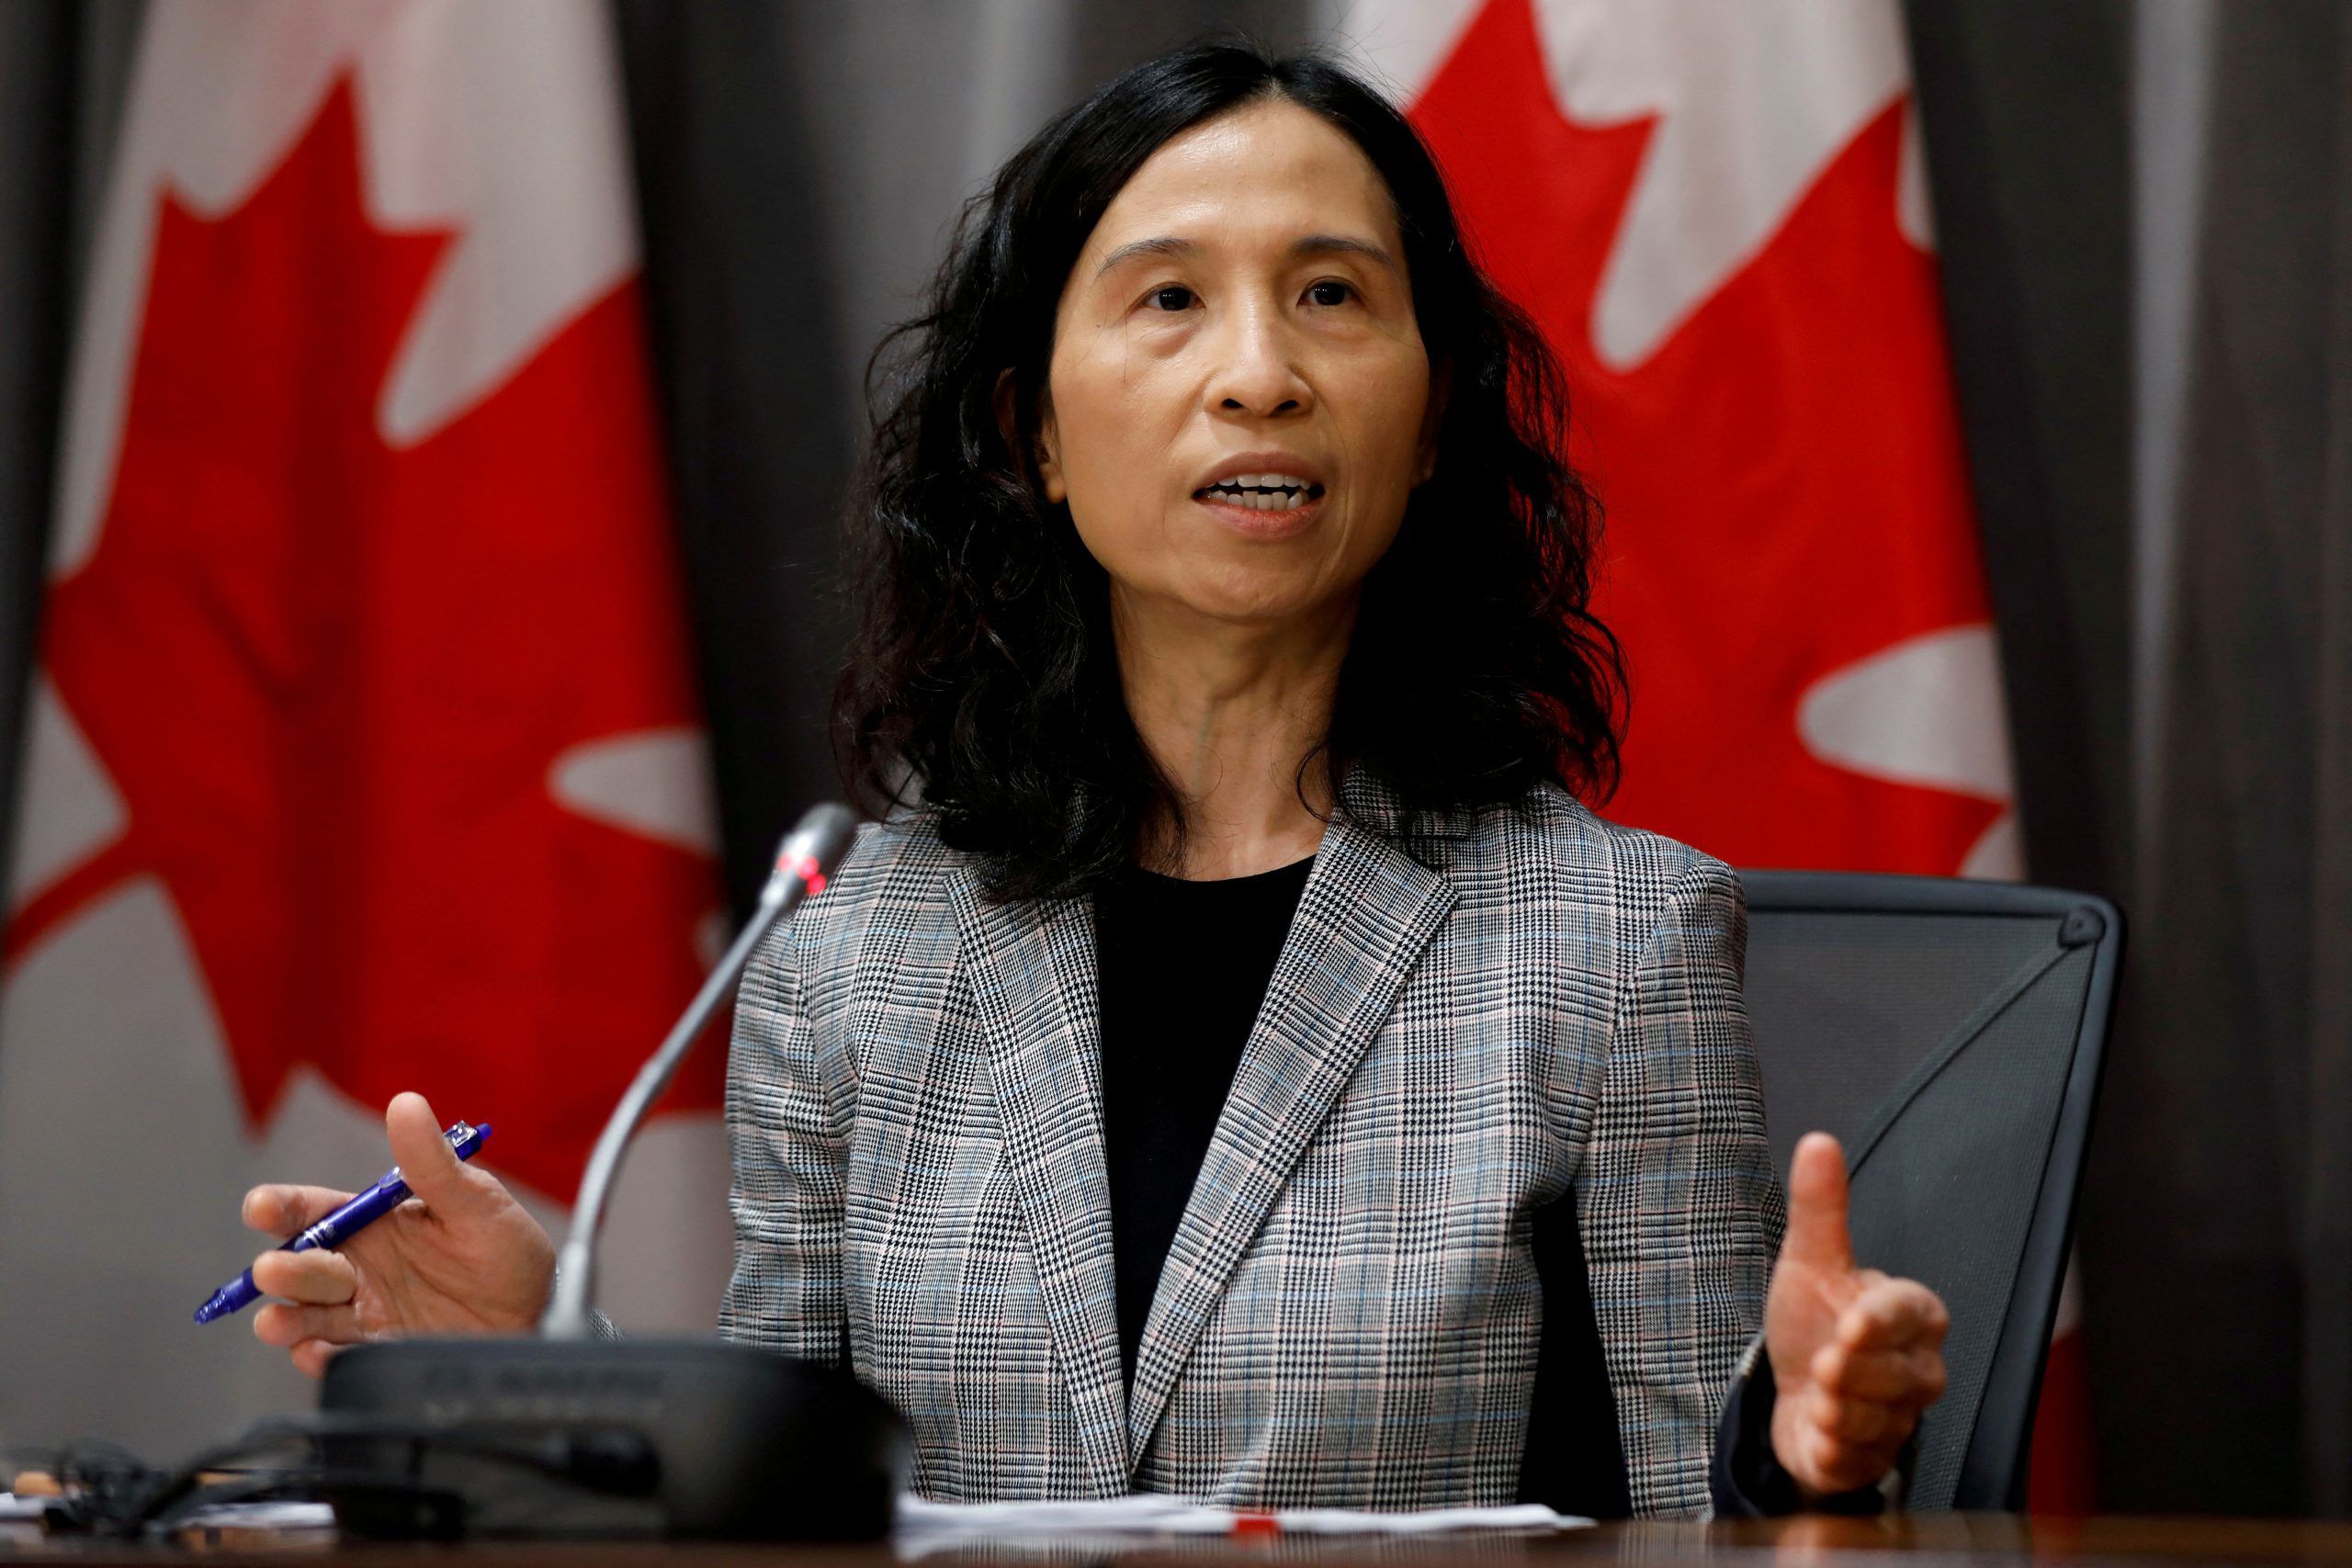  Chief Public Health Officer Dr. Theresa Tam, shown on March 23, 2020, says Canada’s hospitals are still under intense strain despite signs Omicron cases are peaking.